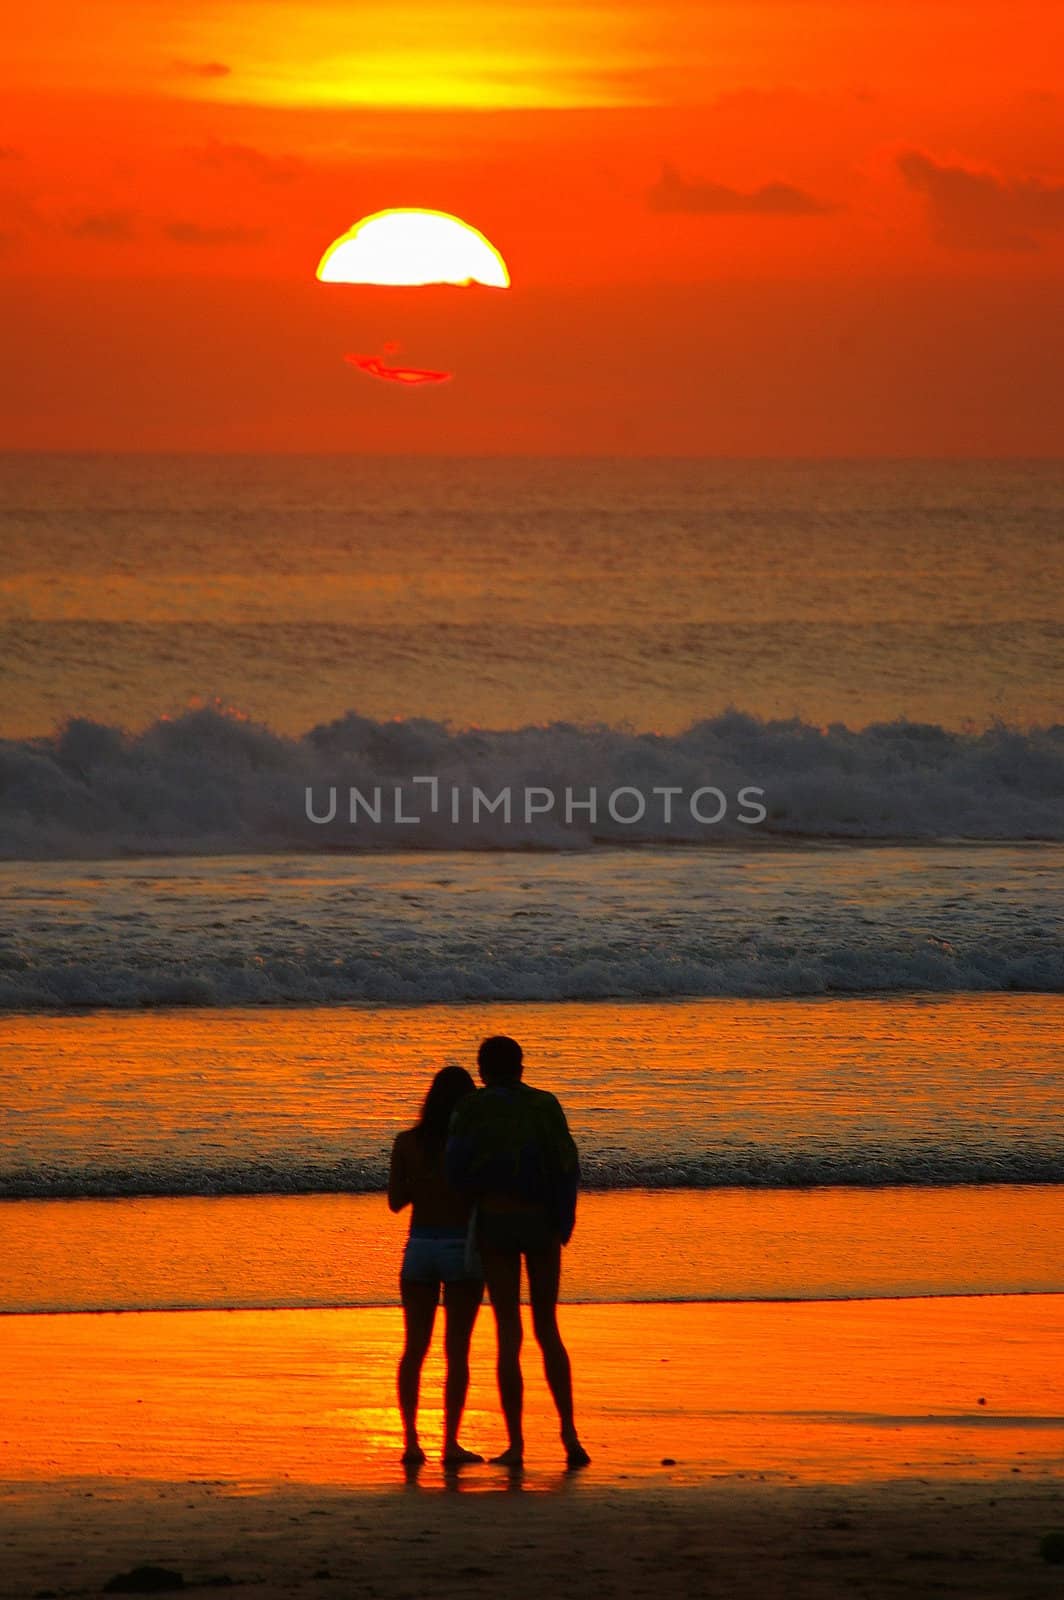 A couple admiring the sunset at Double Six beach, Bali, Indonesia.